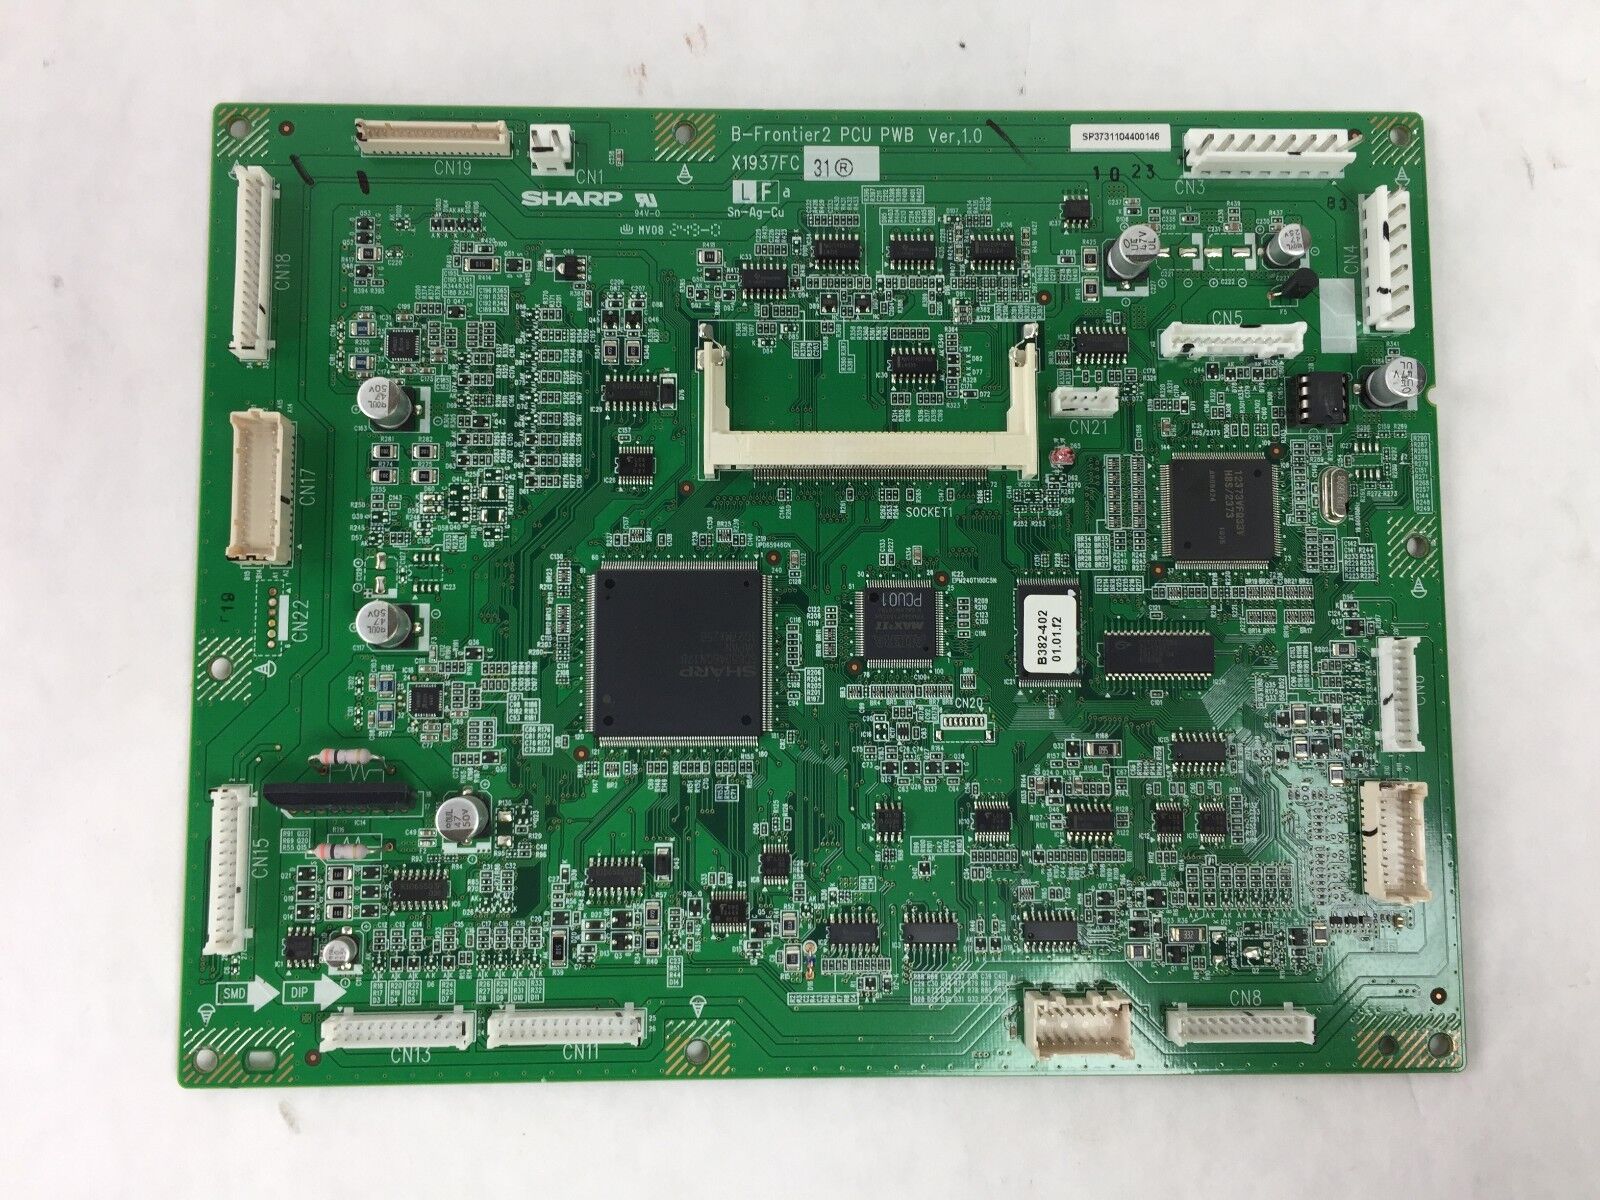 Sharp MX-C401 C400 DX-C401 C402SC Frontier PCU Board Asy with Firmware